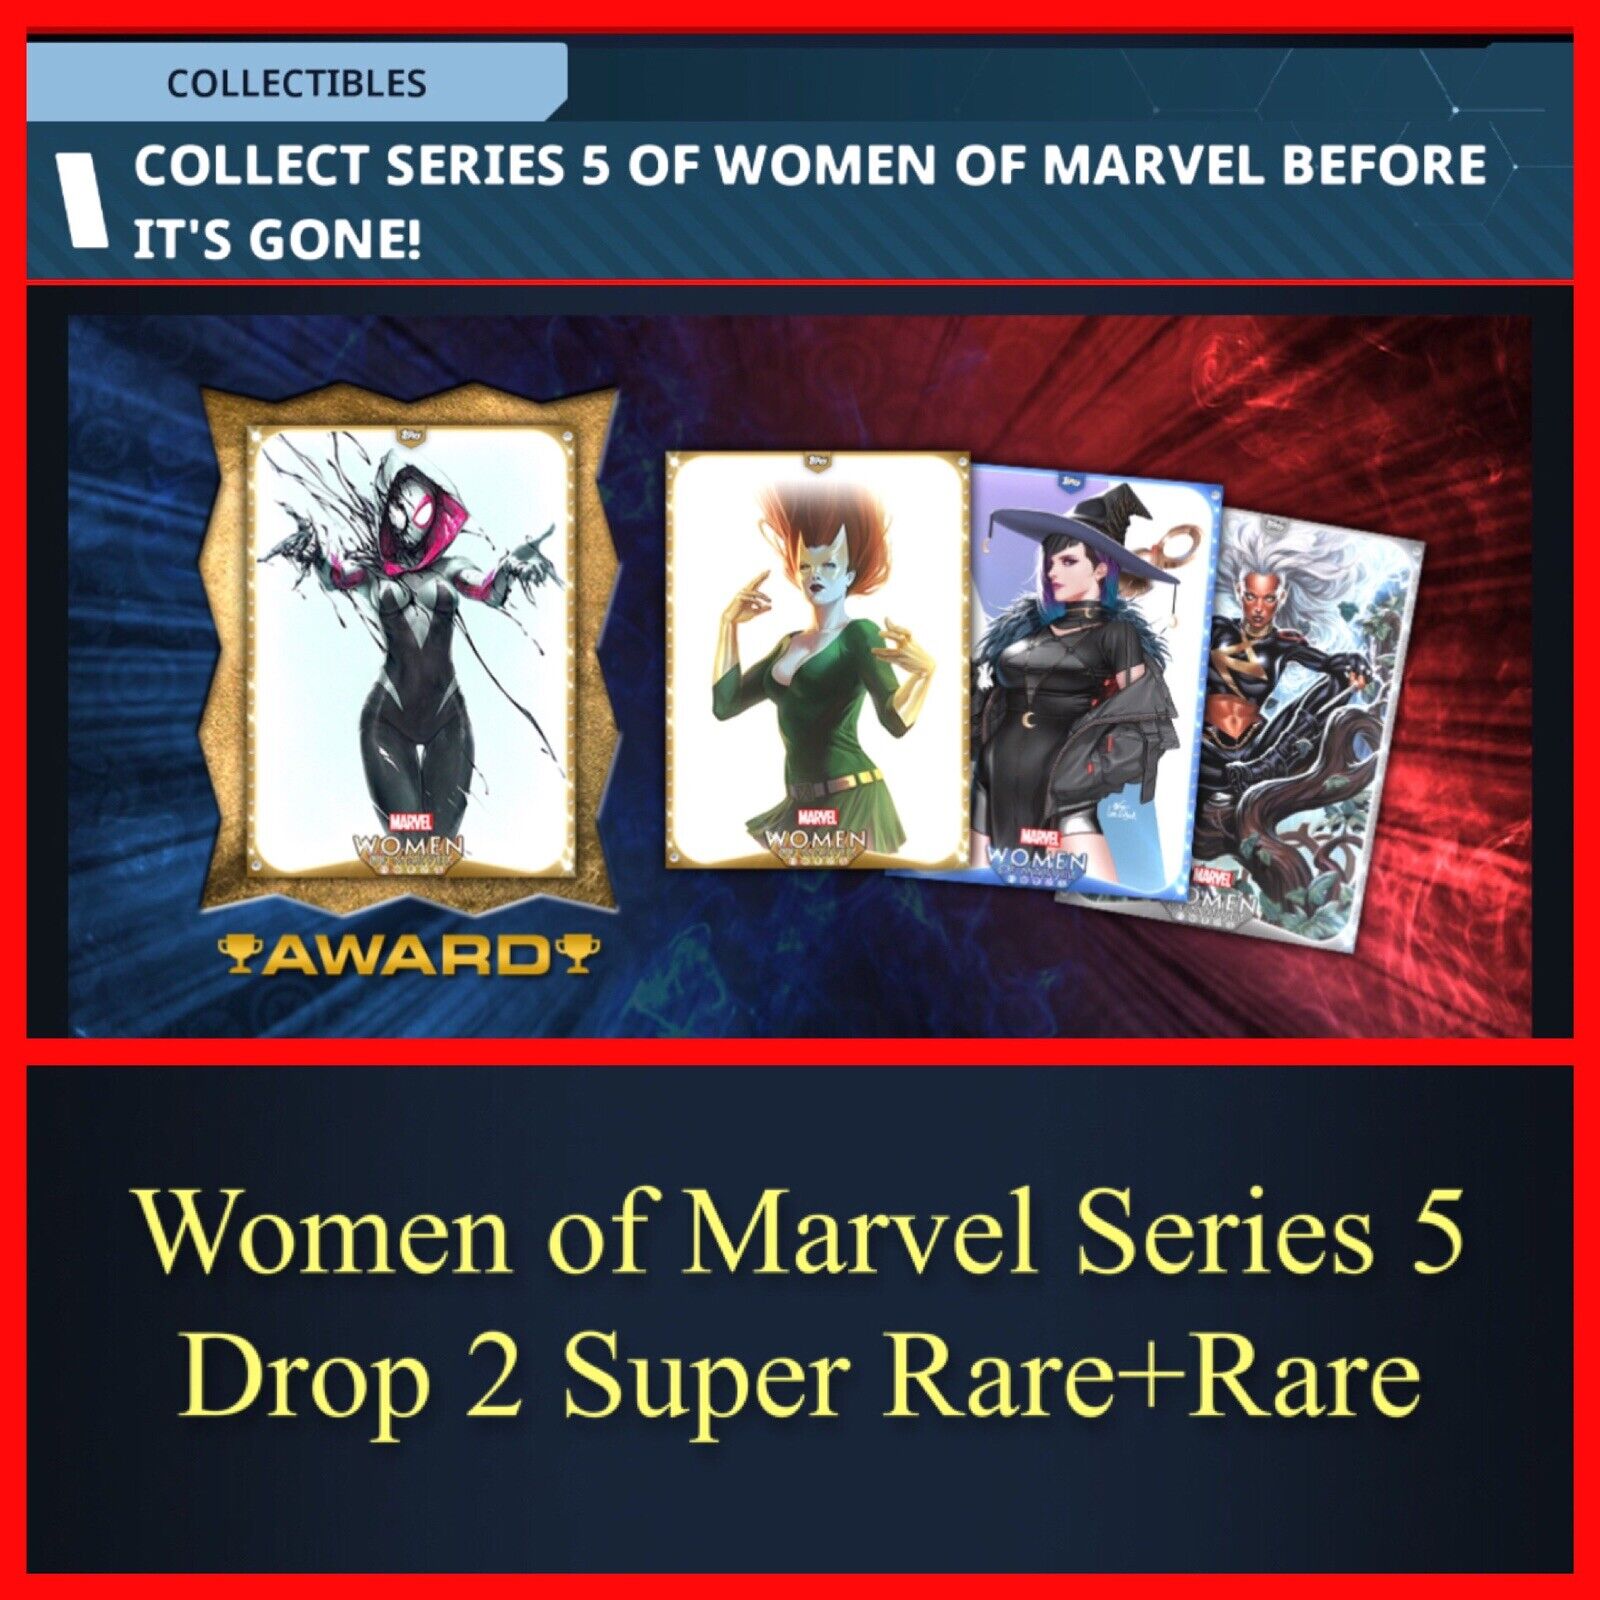 WOMEN OF MARVEL SERIES 5 DROP 2 SUPER RARE+RARE 6 CARD SET-TOPPS MARVEL COLLECT